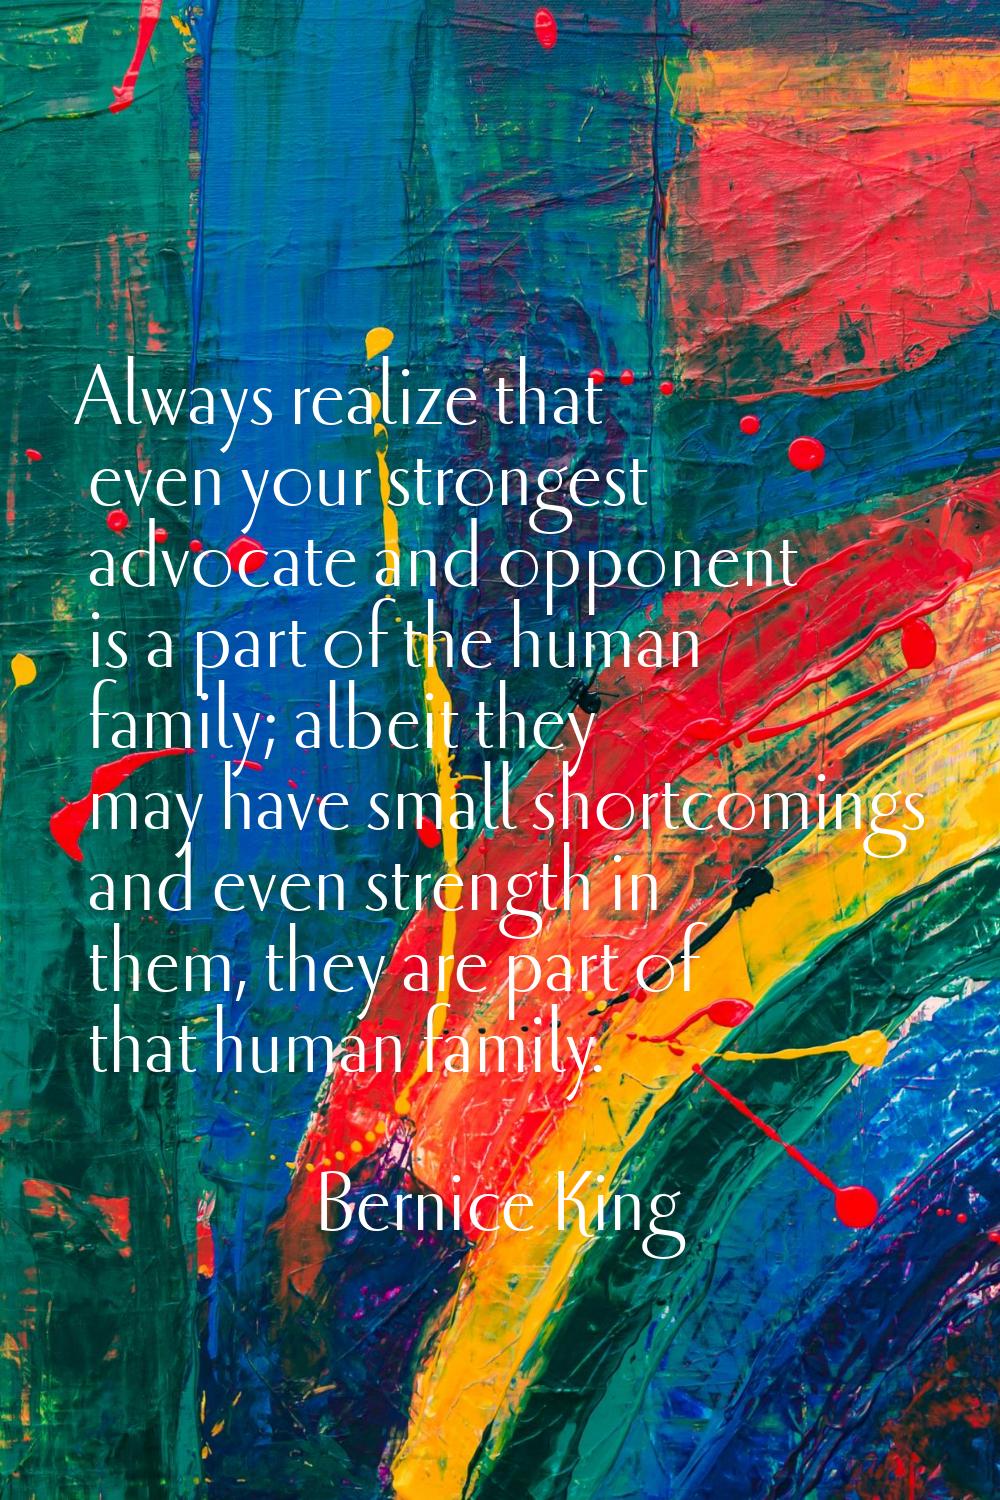 Always realize that even your strongest advocate and opponent is a part of the human family; albeit